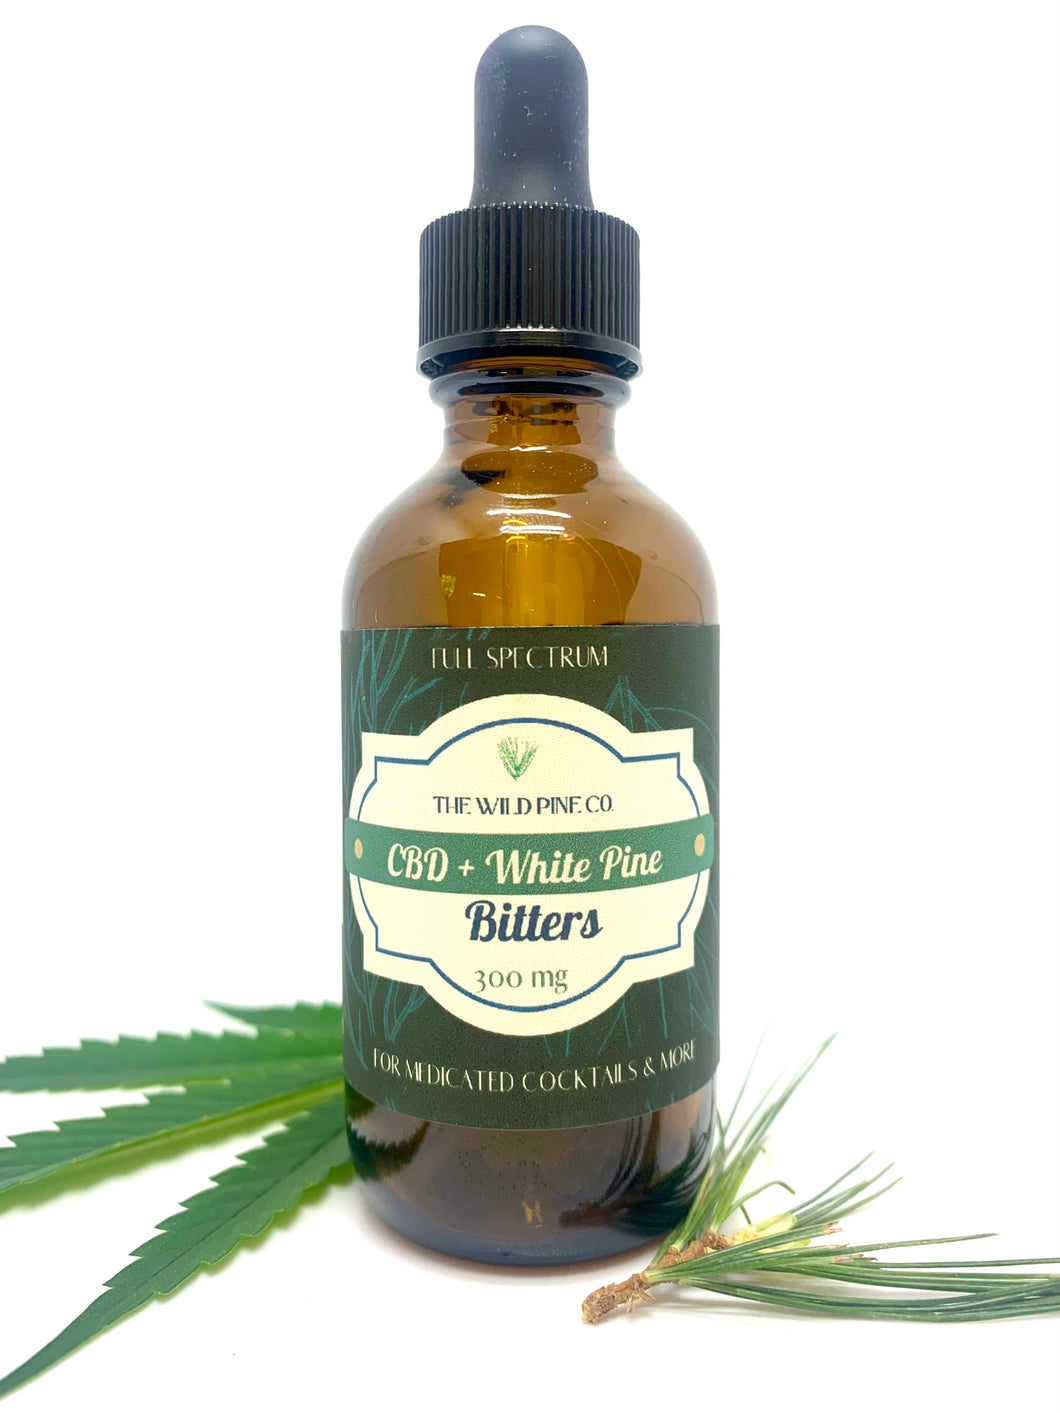 Eastern White Pine + CBD Bitters - 300 MG water soluble for cocktails mocktails & more. Full Spectrum